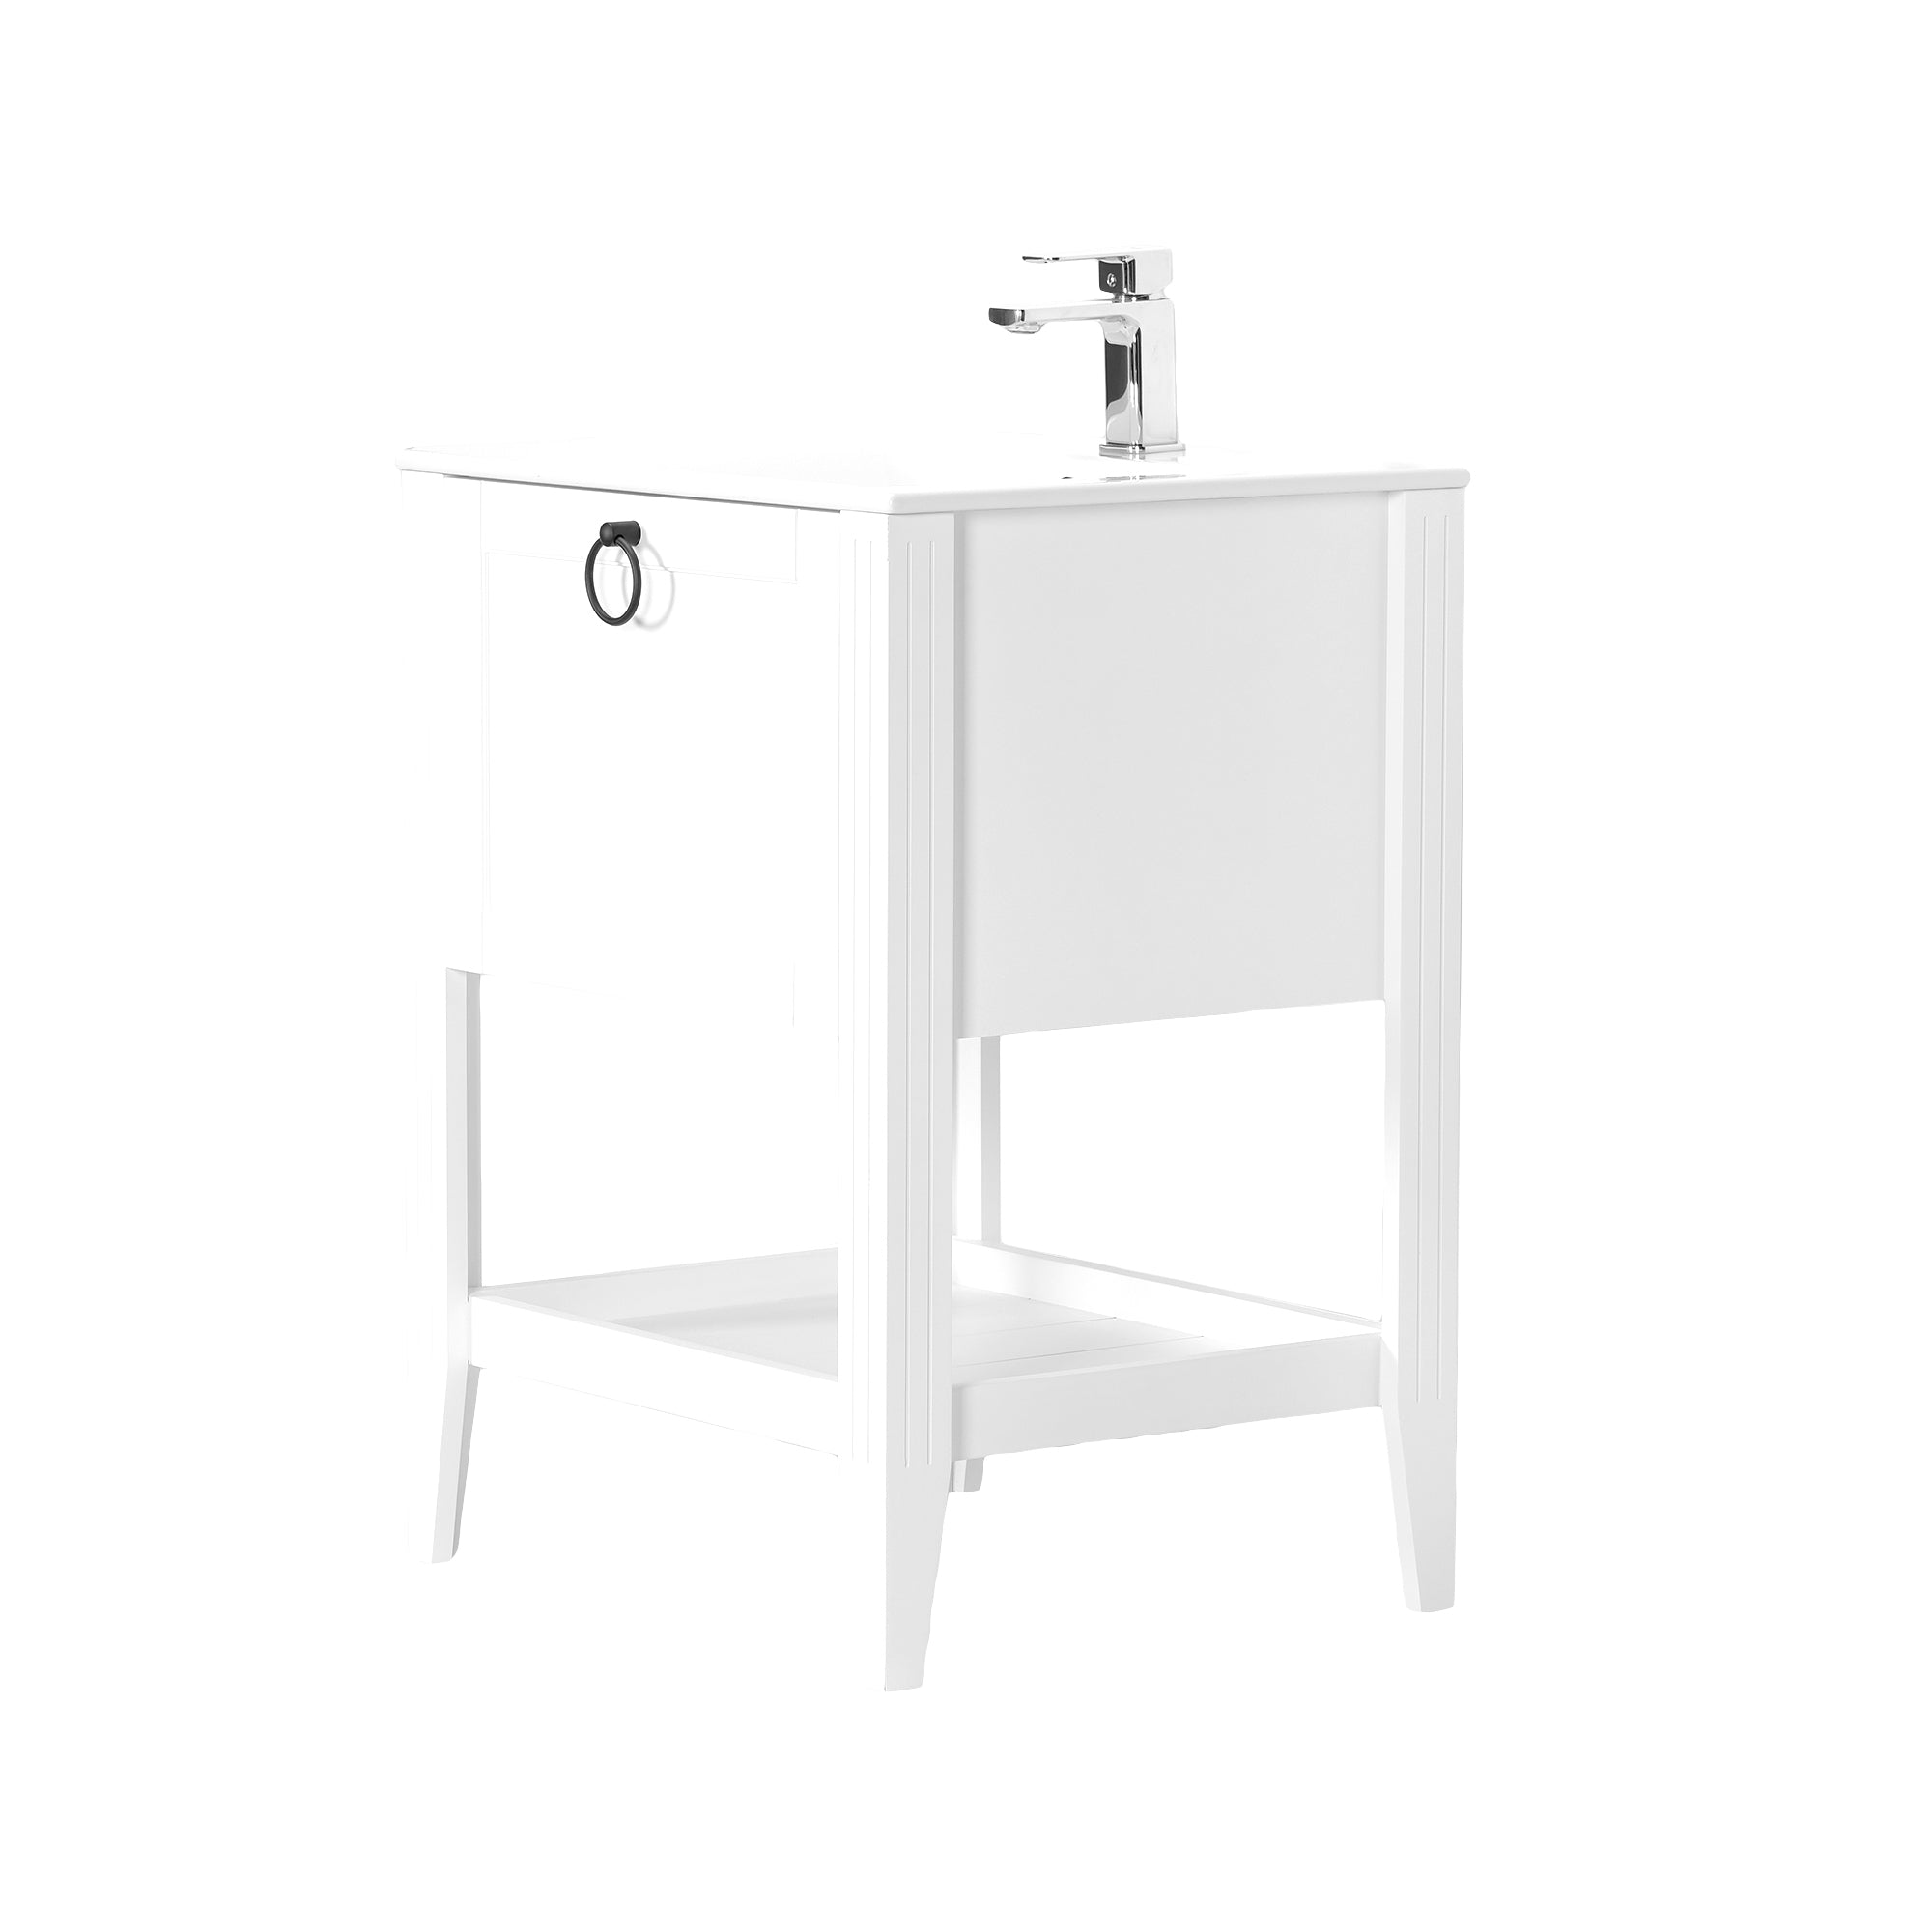 SOFIA 24 INCH FREE STANDING VANITY AND SINK COMBO - WHITE